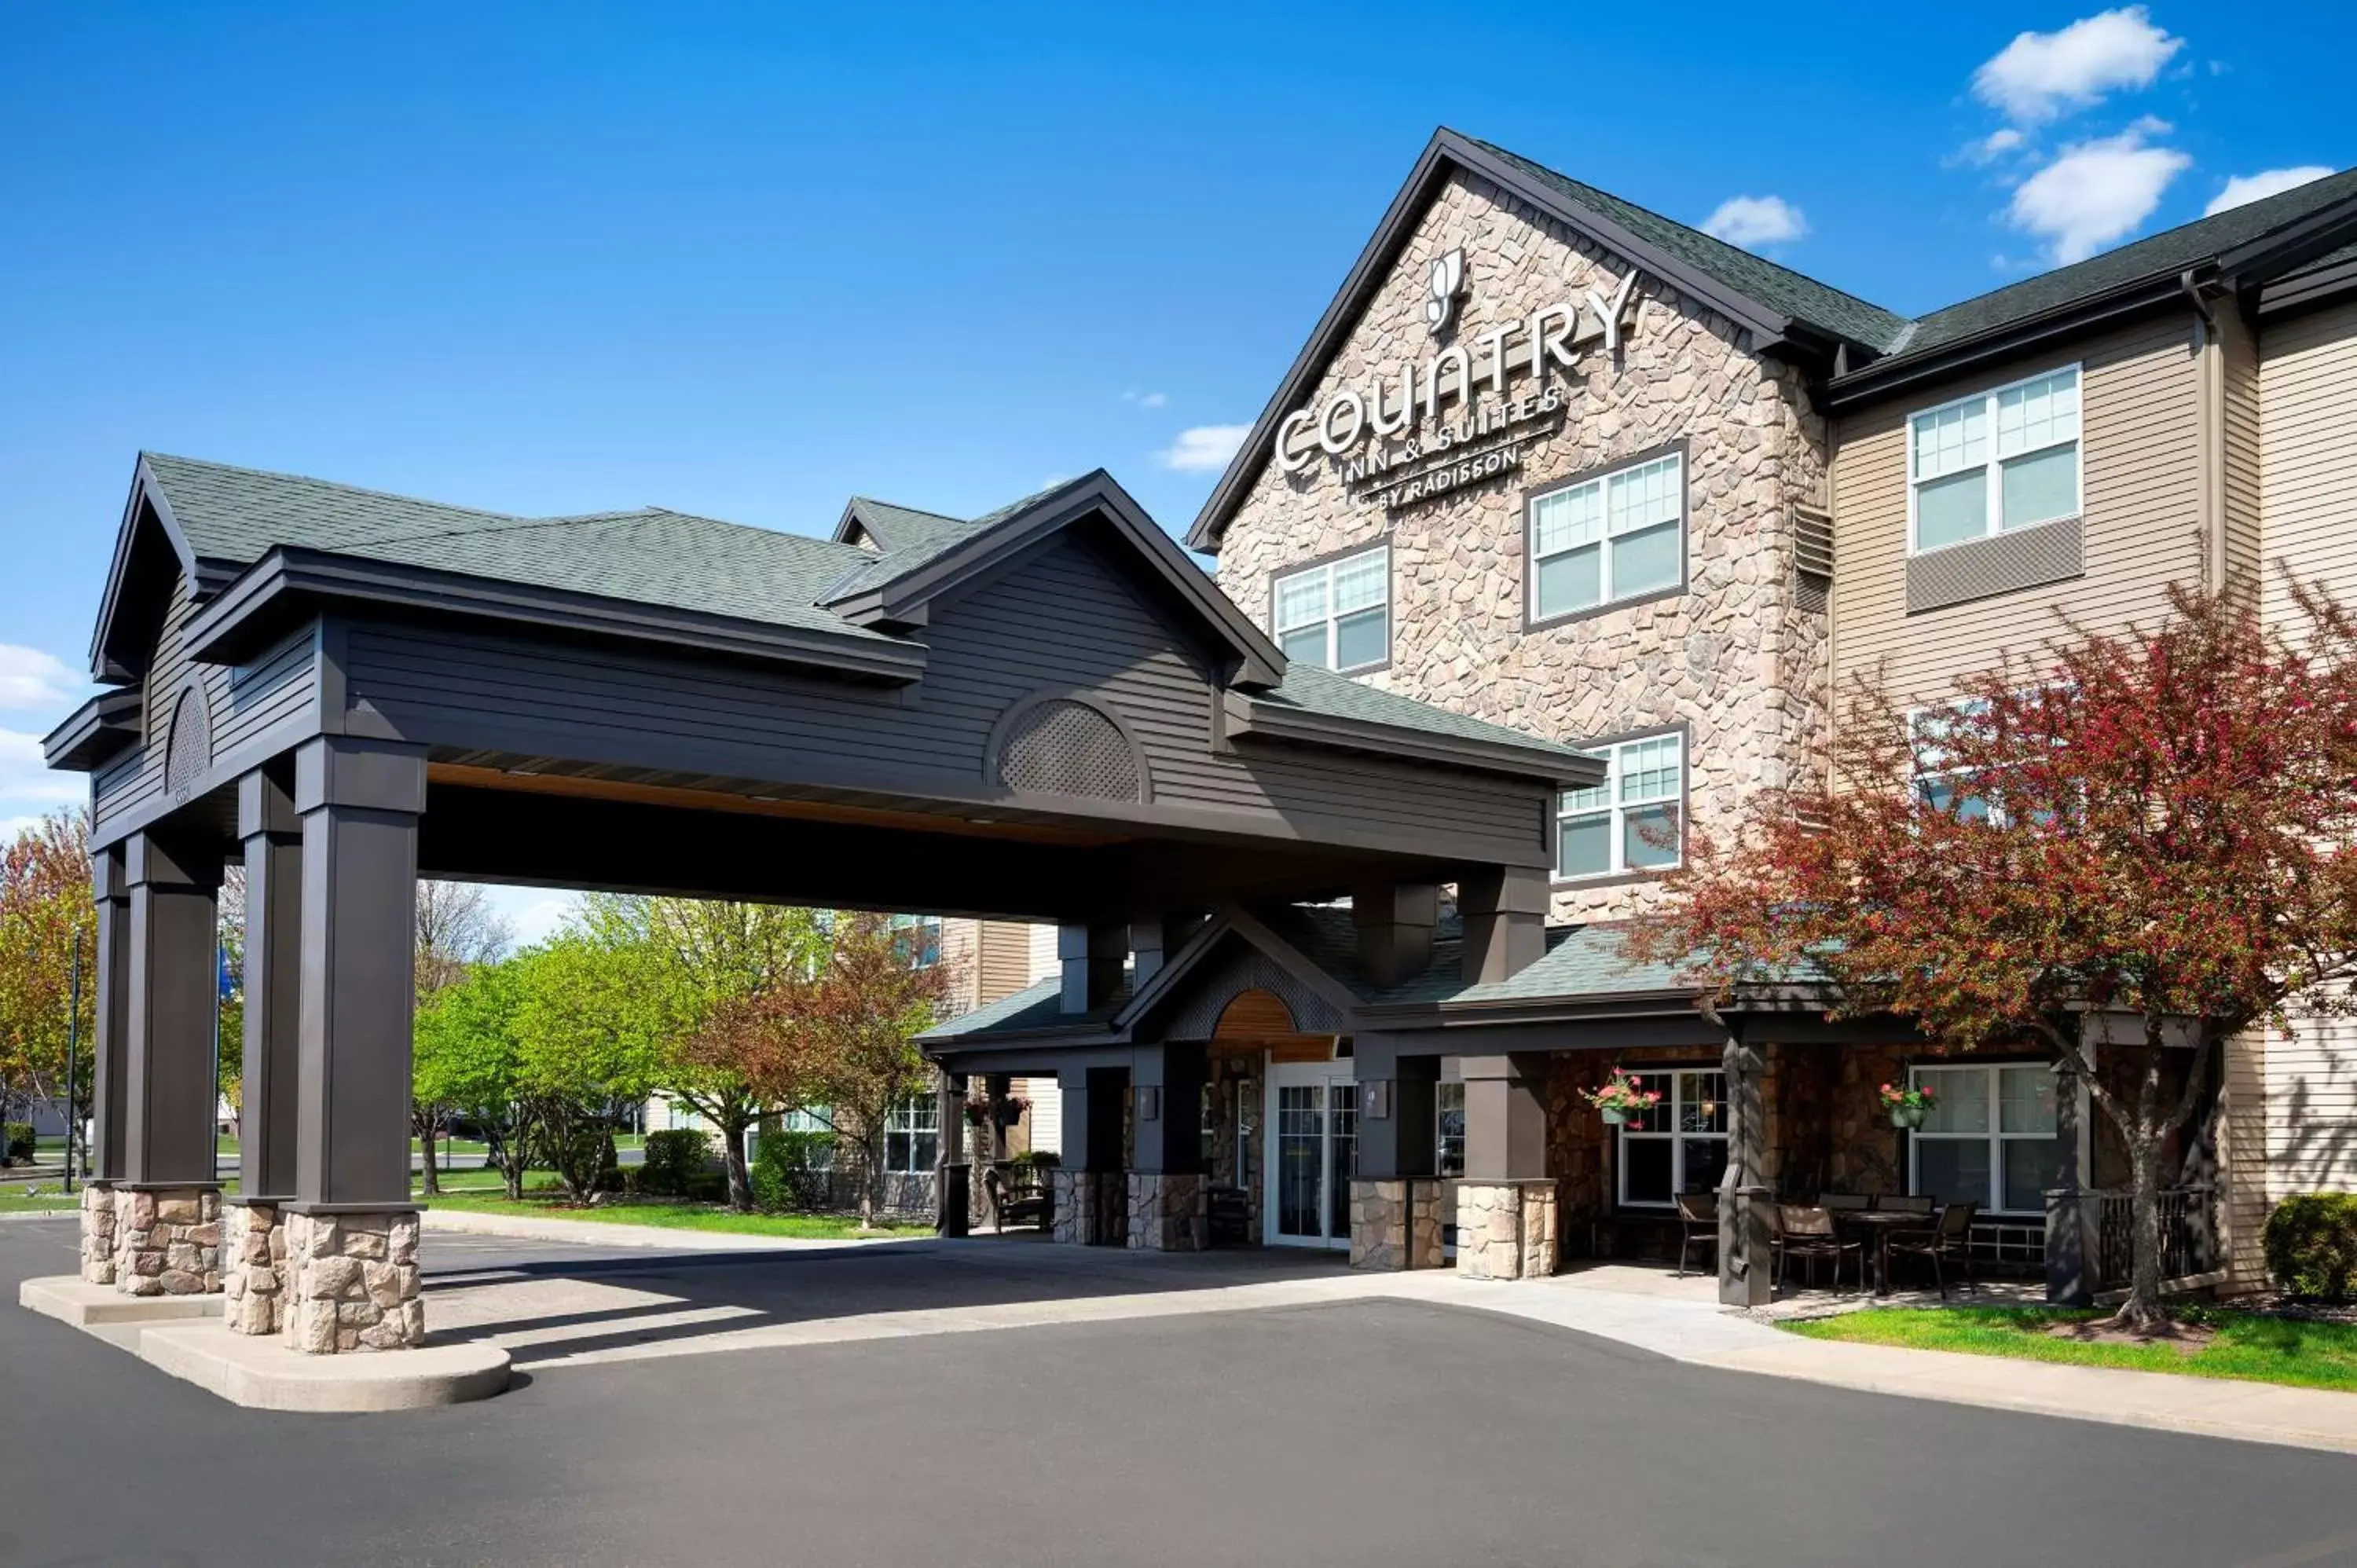 Property building in Country Inn & Suites by Radisson, Albertville, MN